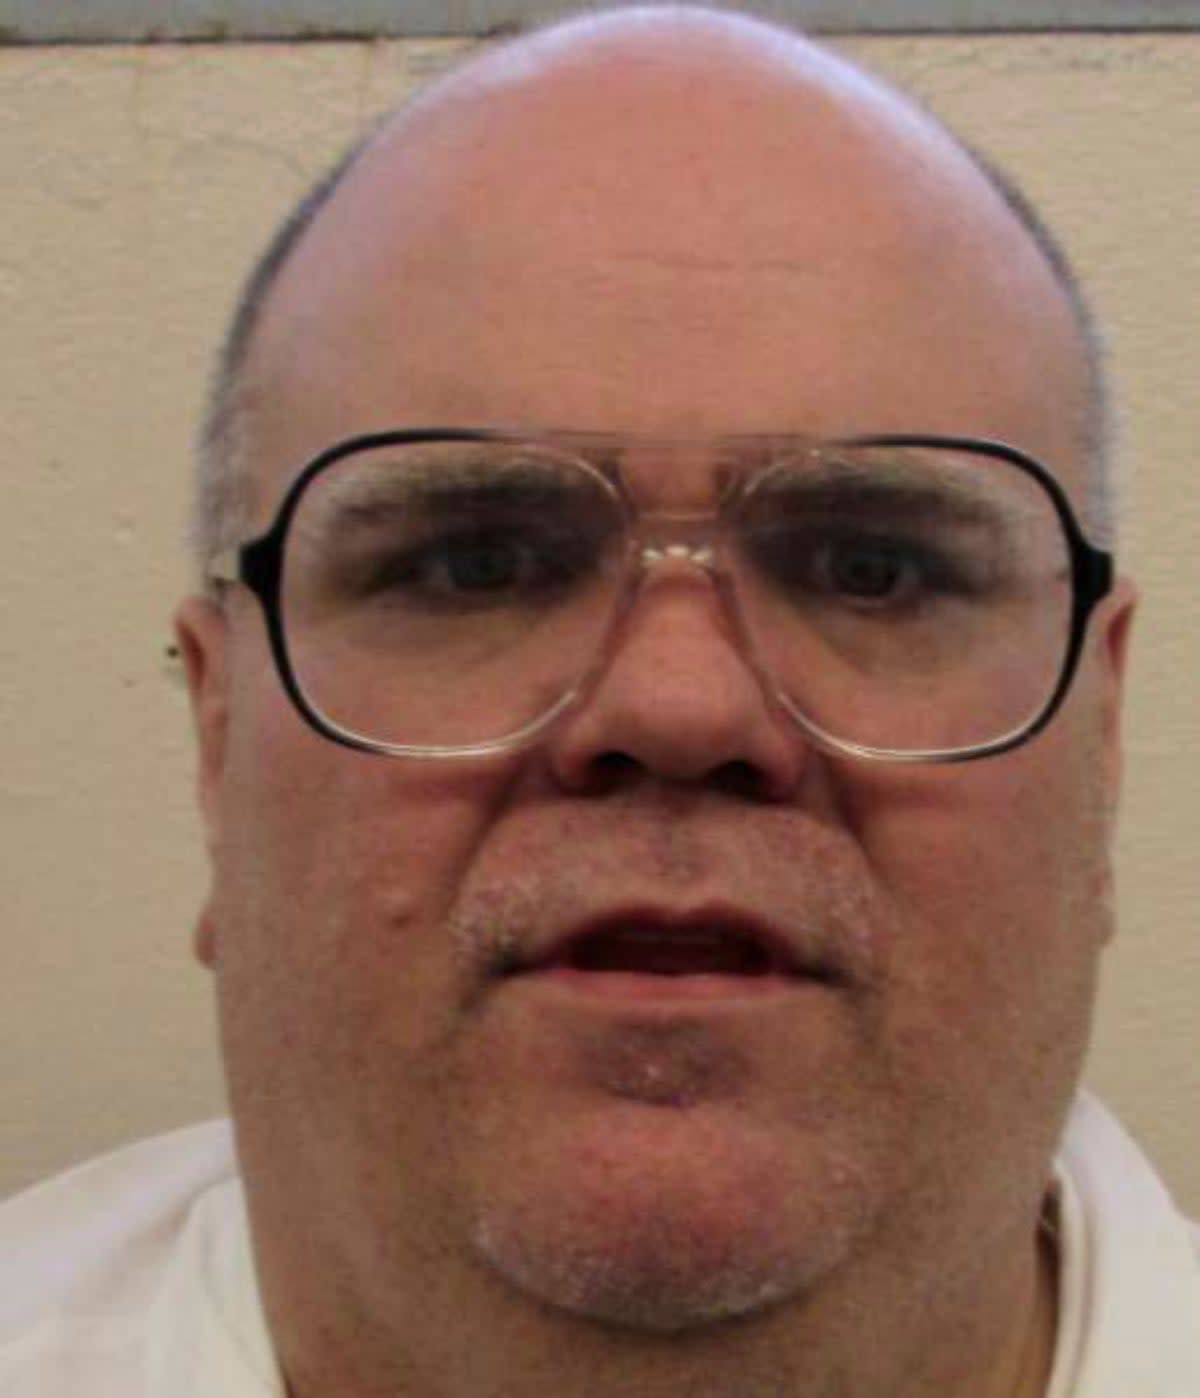 Alan Eugene Miller, pictured in an undated booking photo, will be executed in September, Alabama Governor Kay Ivey announced (Alabama Department of Corrections)